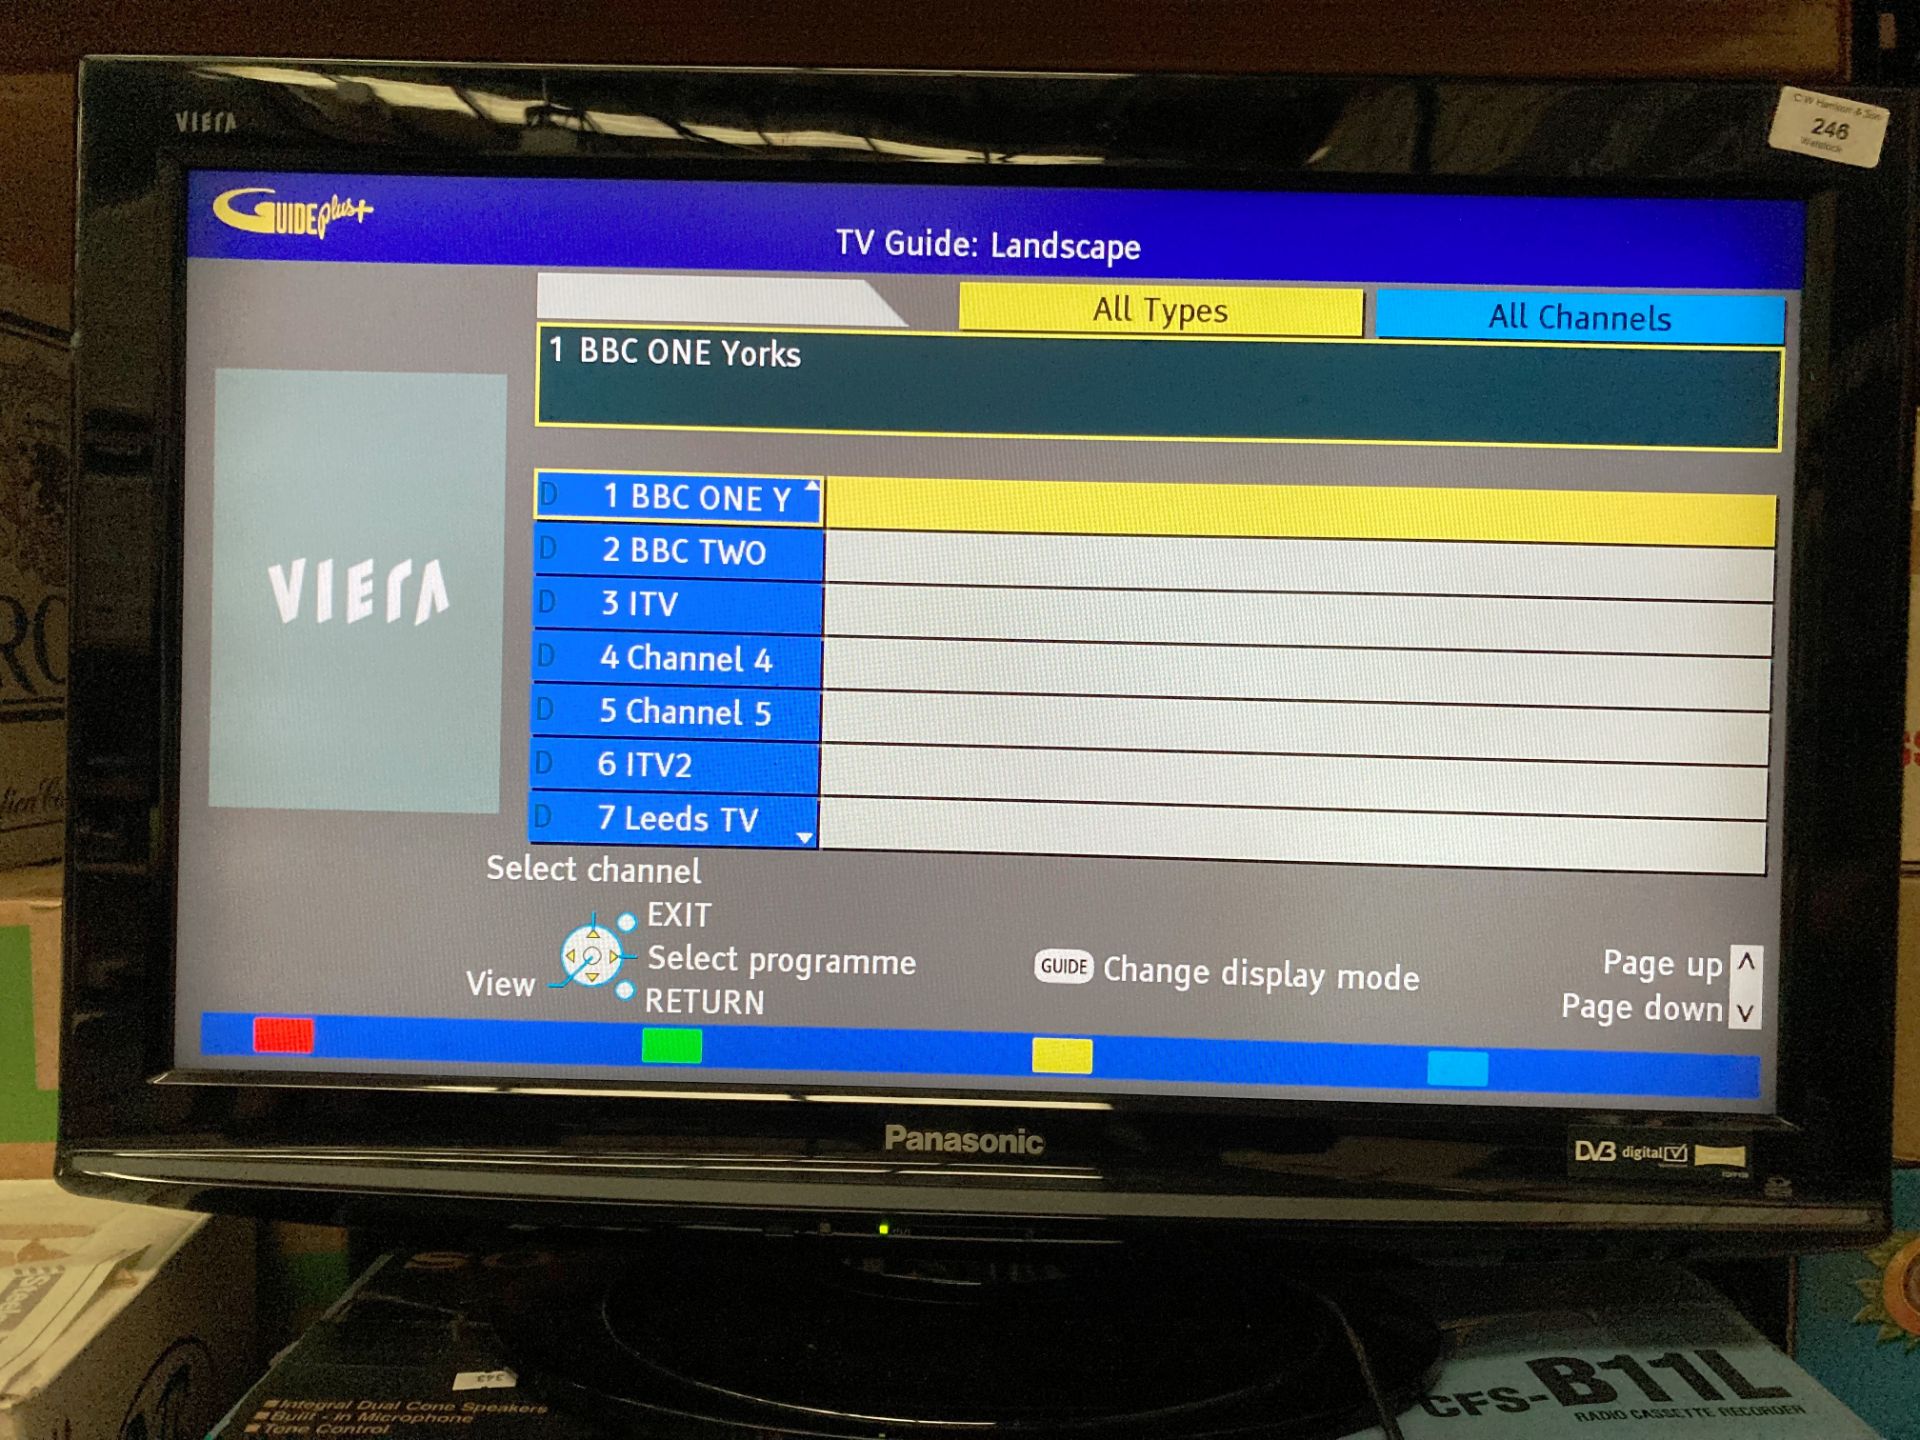 A Panasonic Viera DV3 digital TX-L26X10B 26" LCD TV complete with remote control and manual